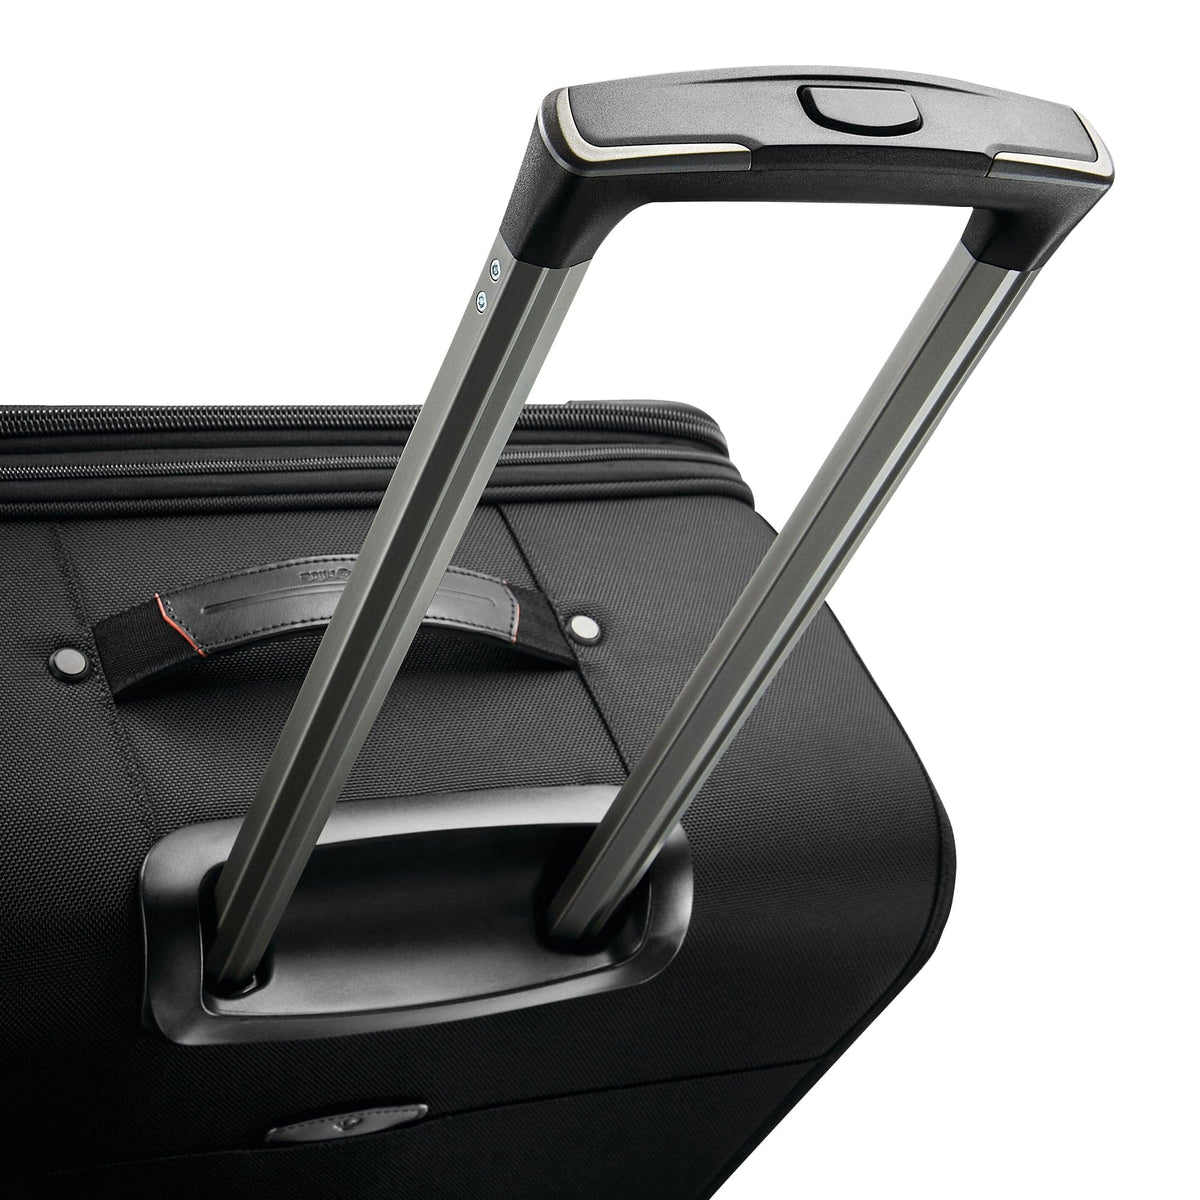 Samsonite Pro 29" Carry-On Expandable Spinner Luggage